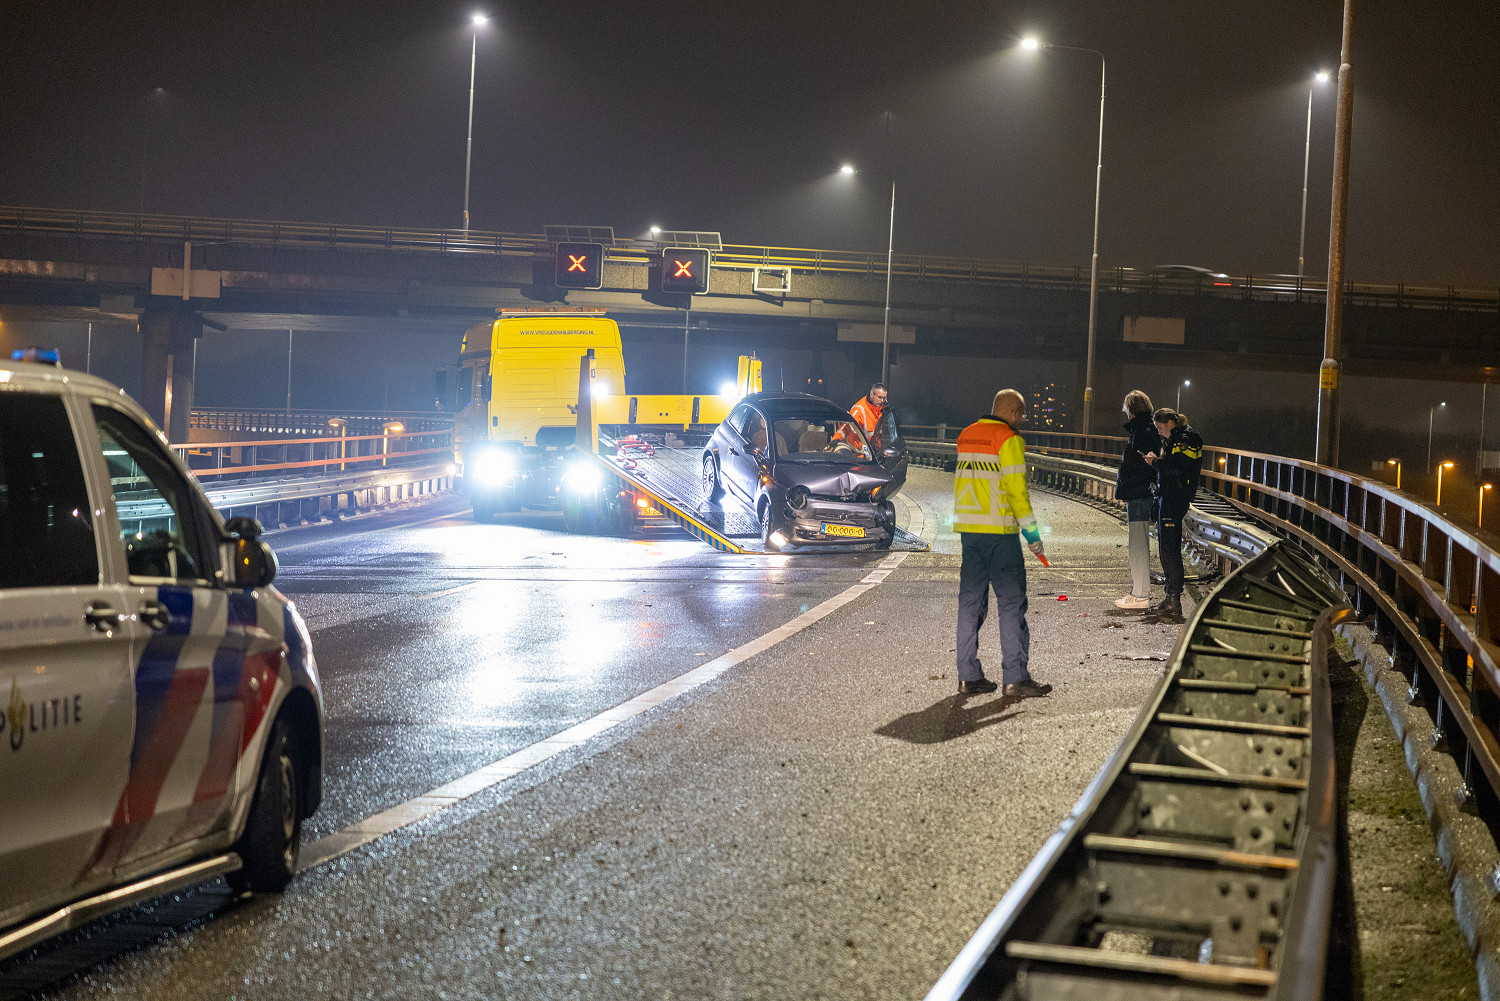 Ted van Doorn of Vreugdenhil Berging records a response time of 4:51 minutes at the Prins Clausplein interchange, late in the evening of 27 December 2021